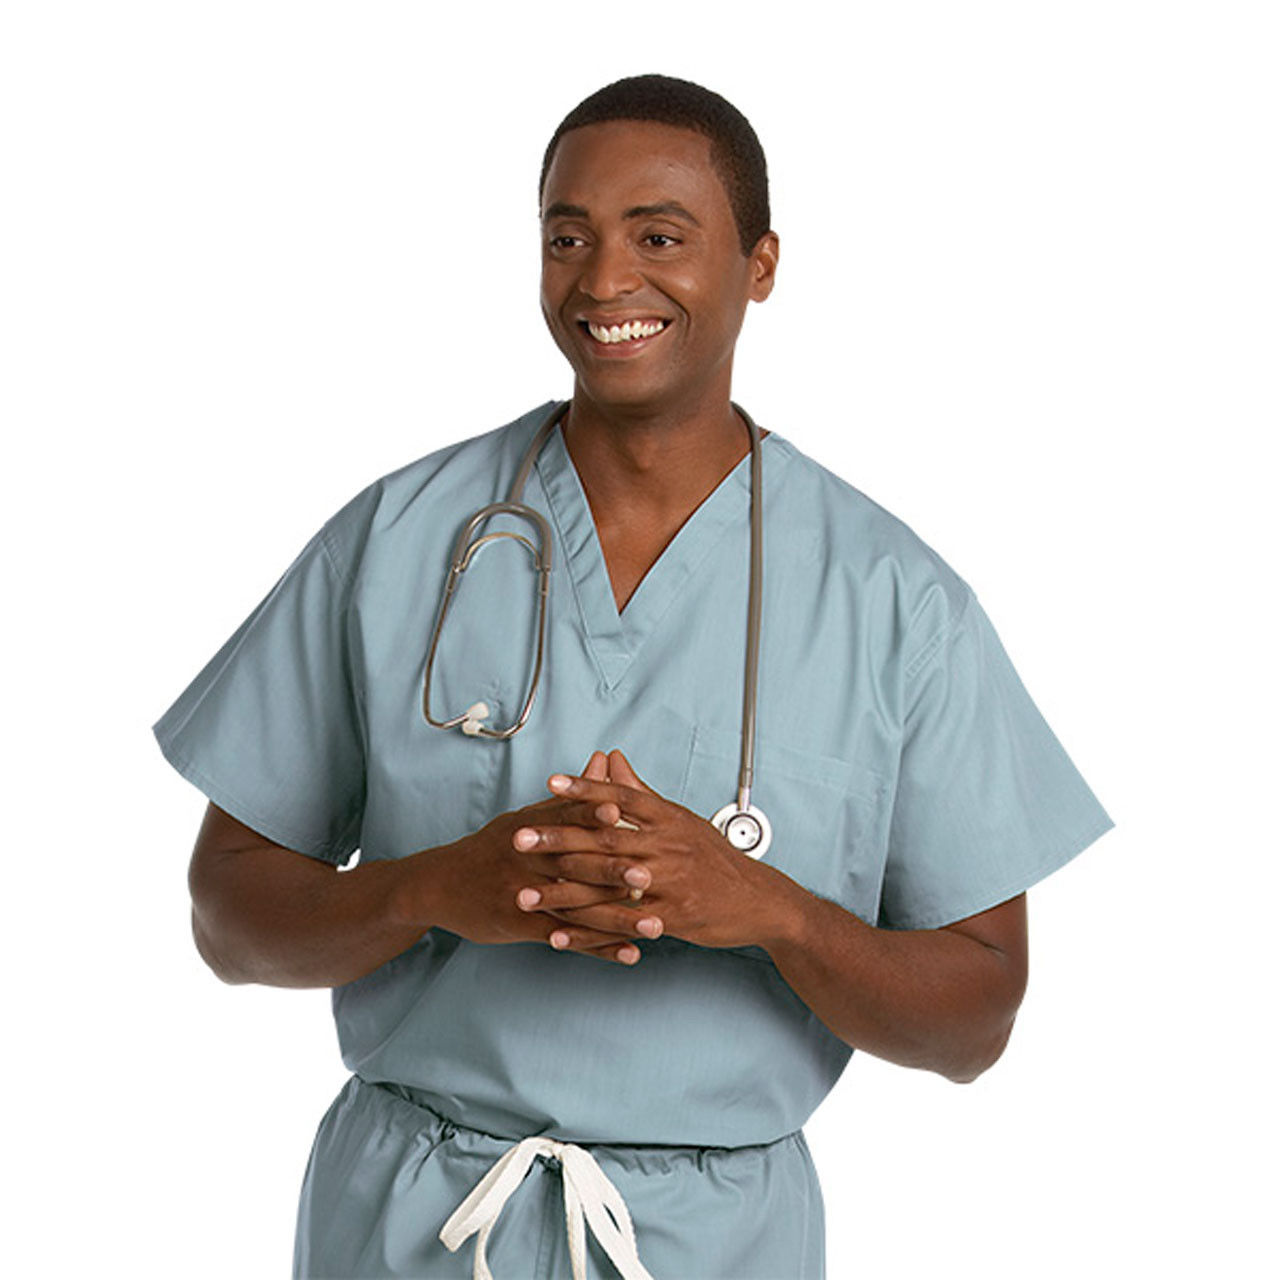 Which company makes the misty green surgical scrubs?